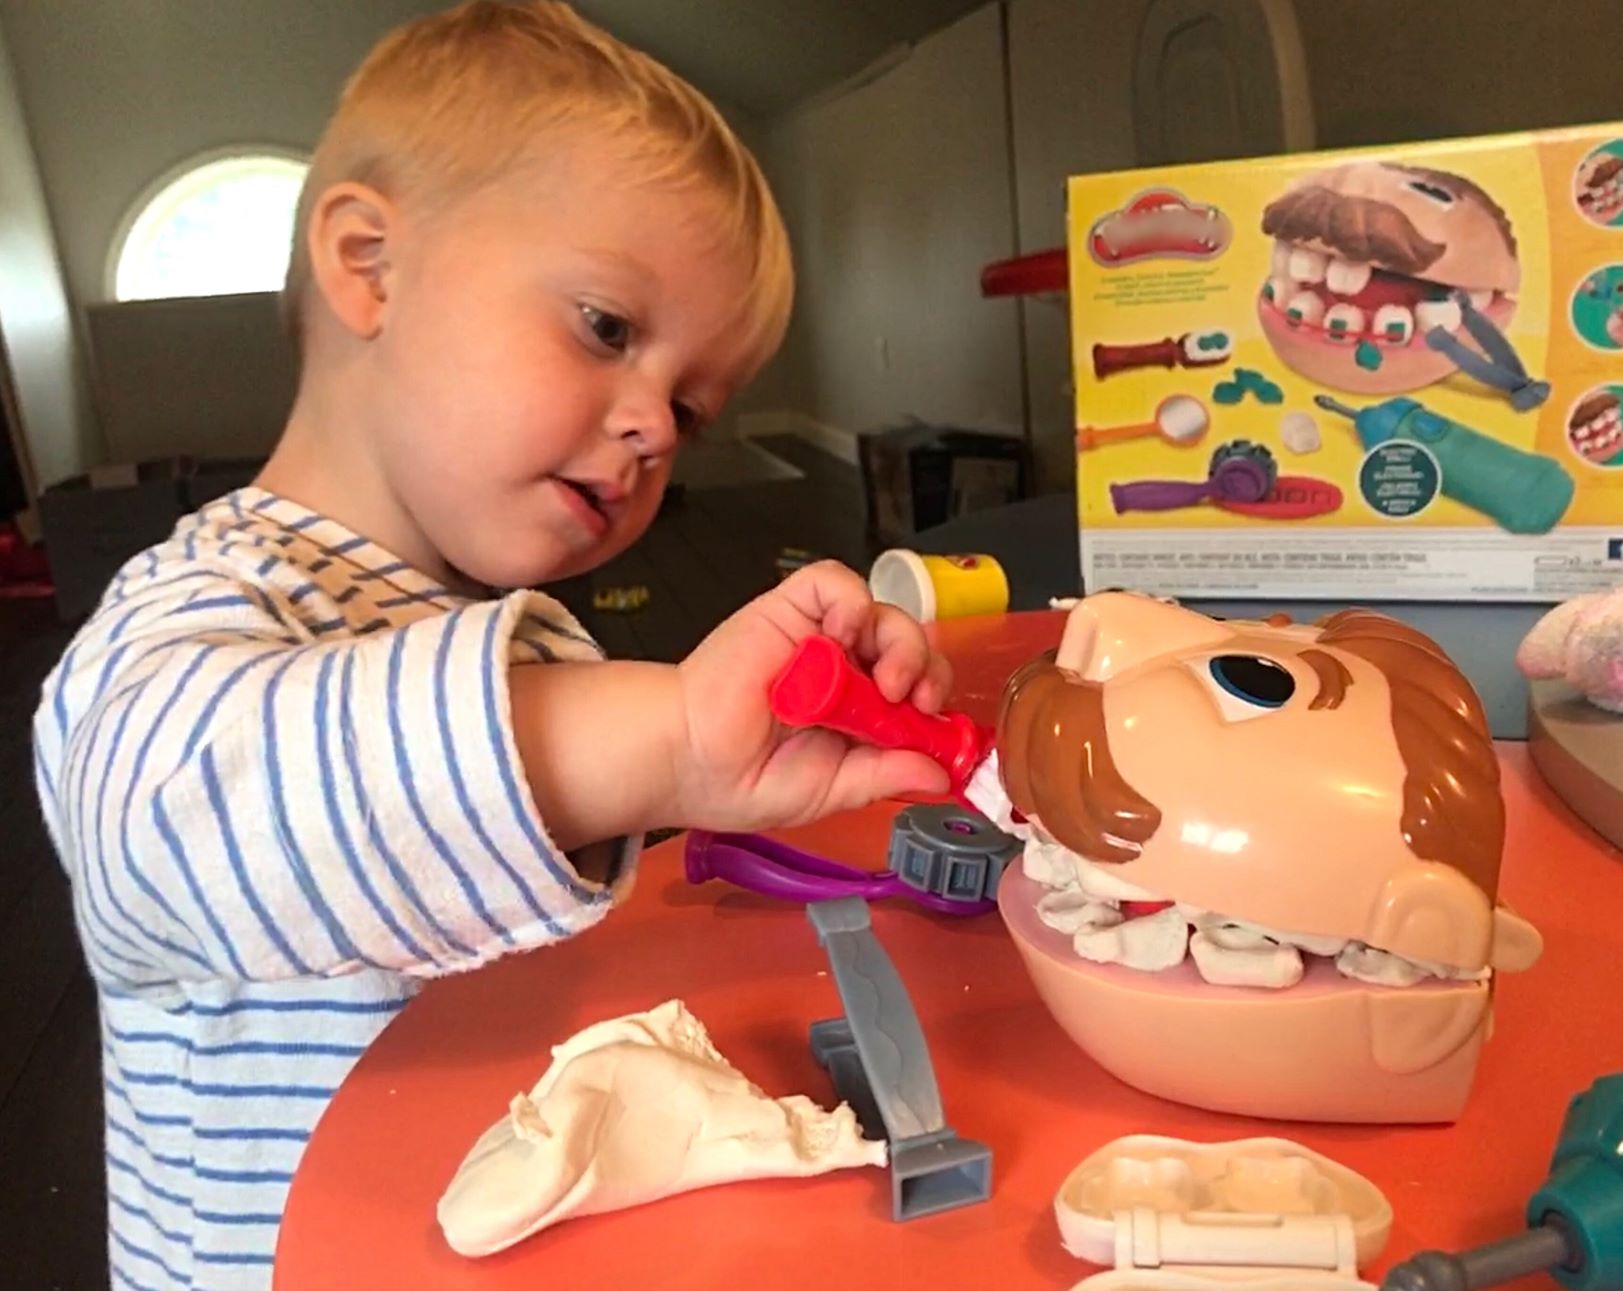 Child playing with Dental Toy kit in play doh